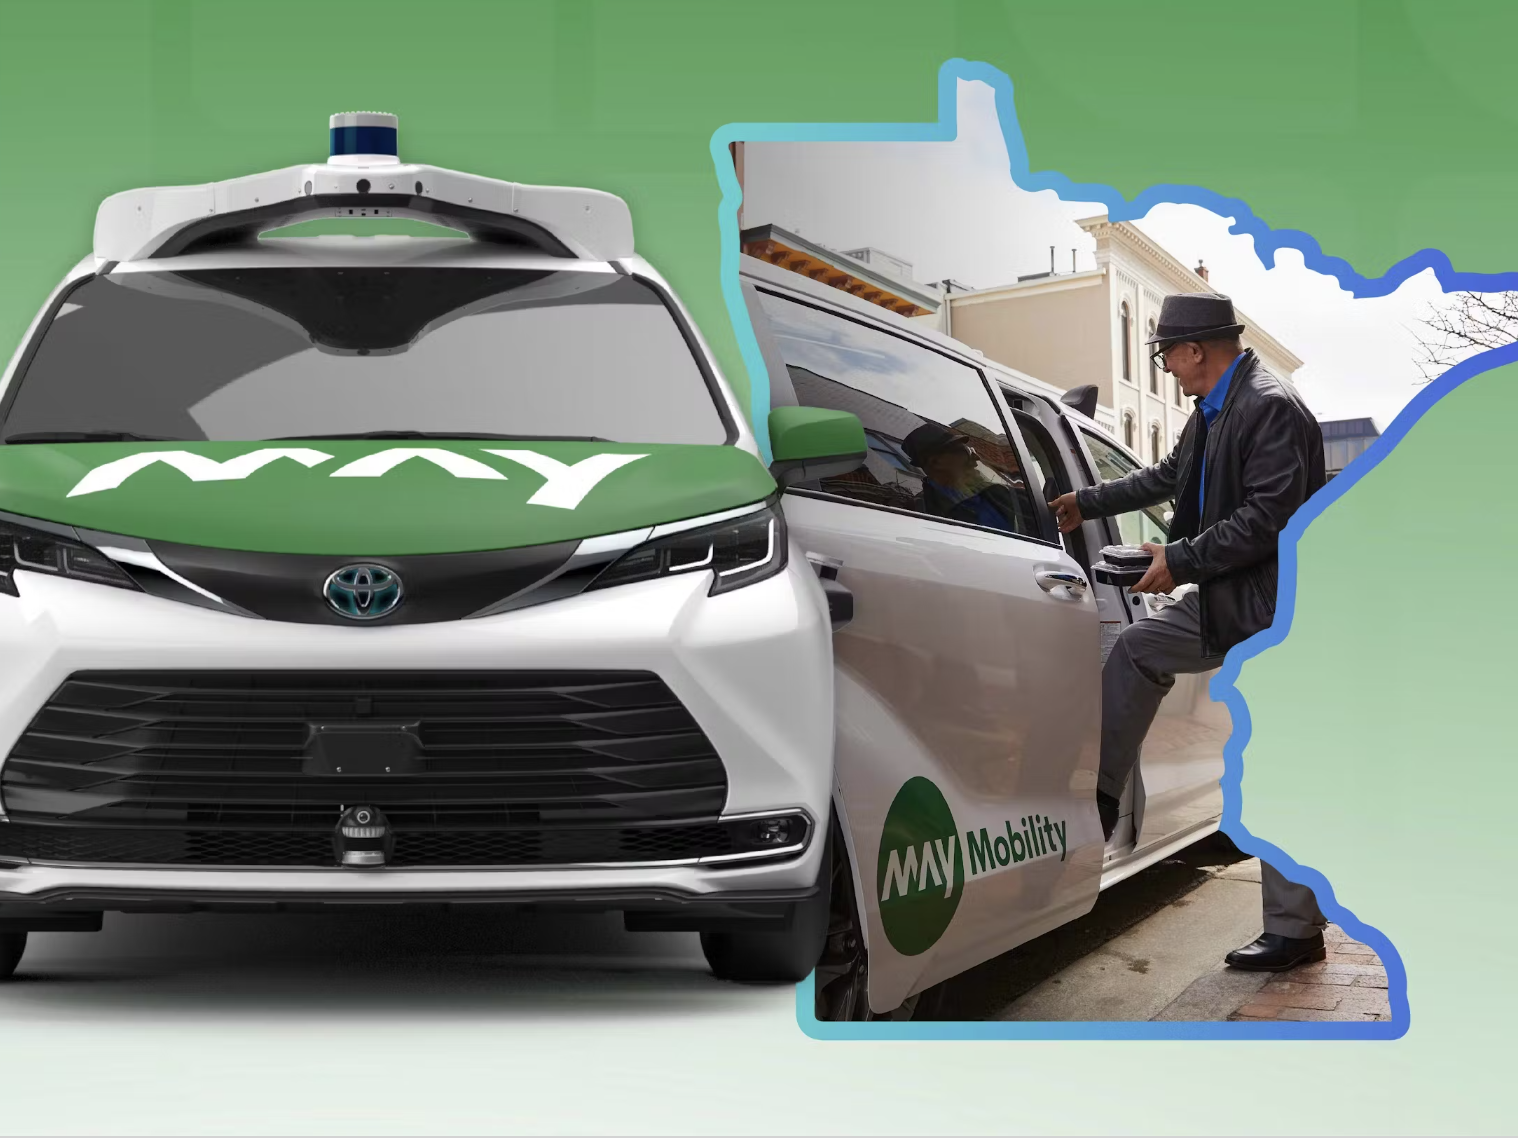 May Mobility to Deploy Autonomous Vehicles in the Twin Cities Area